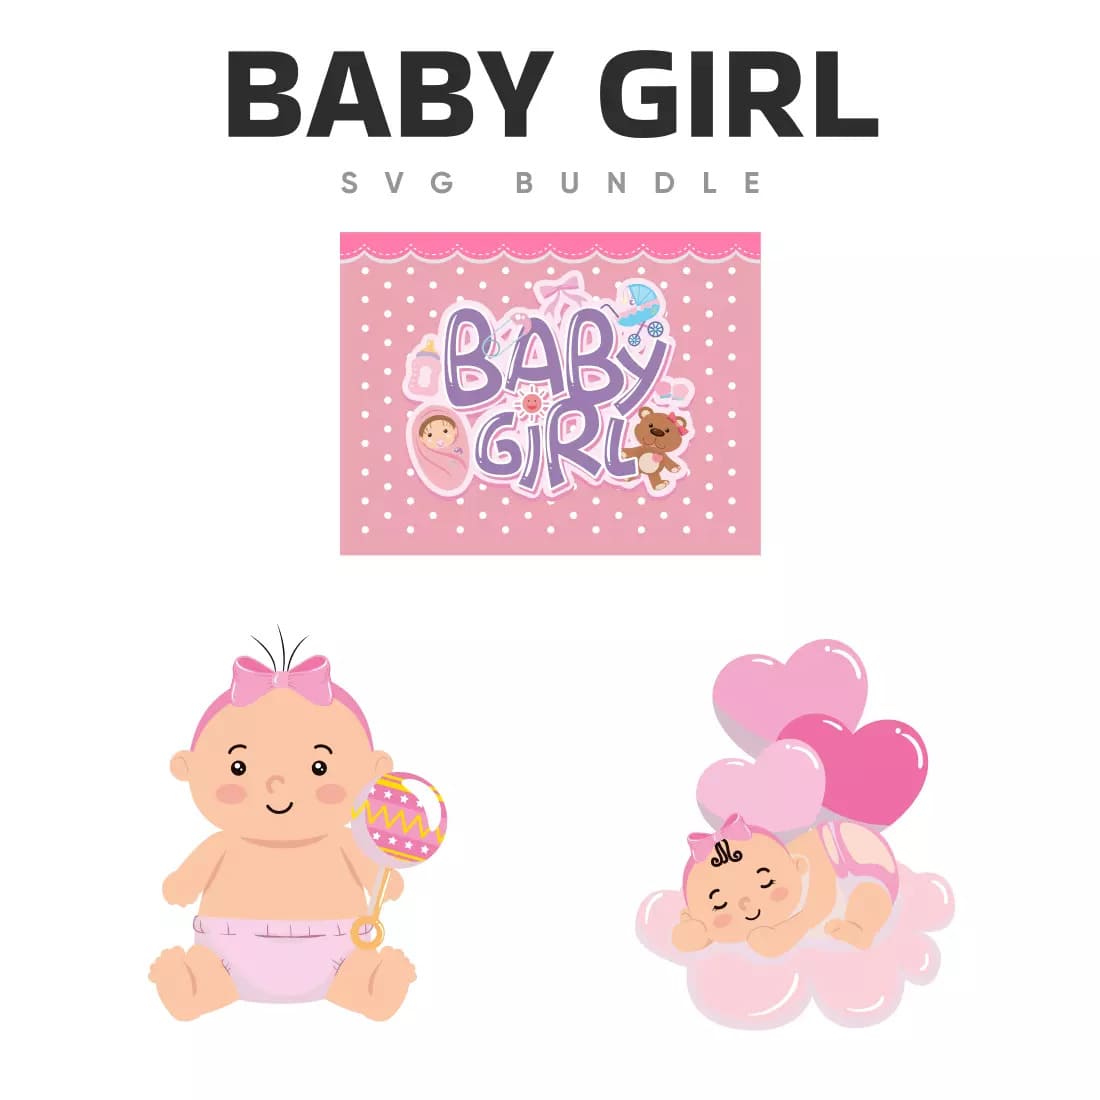 Baby Girl SVG Bundle Preview 4.